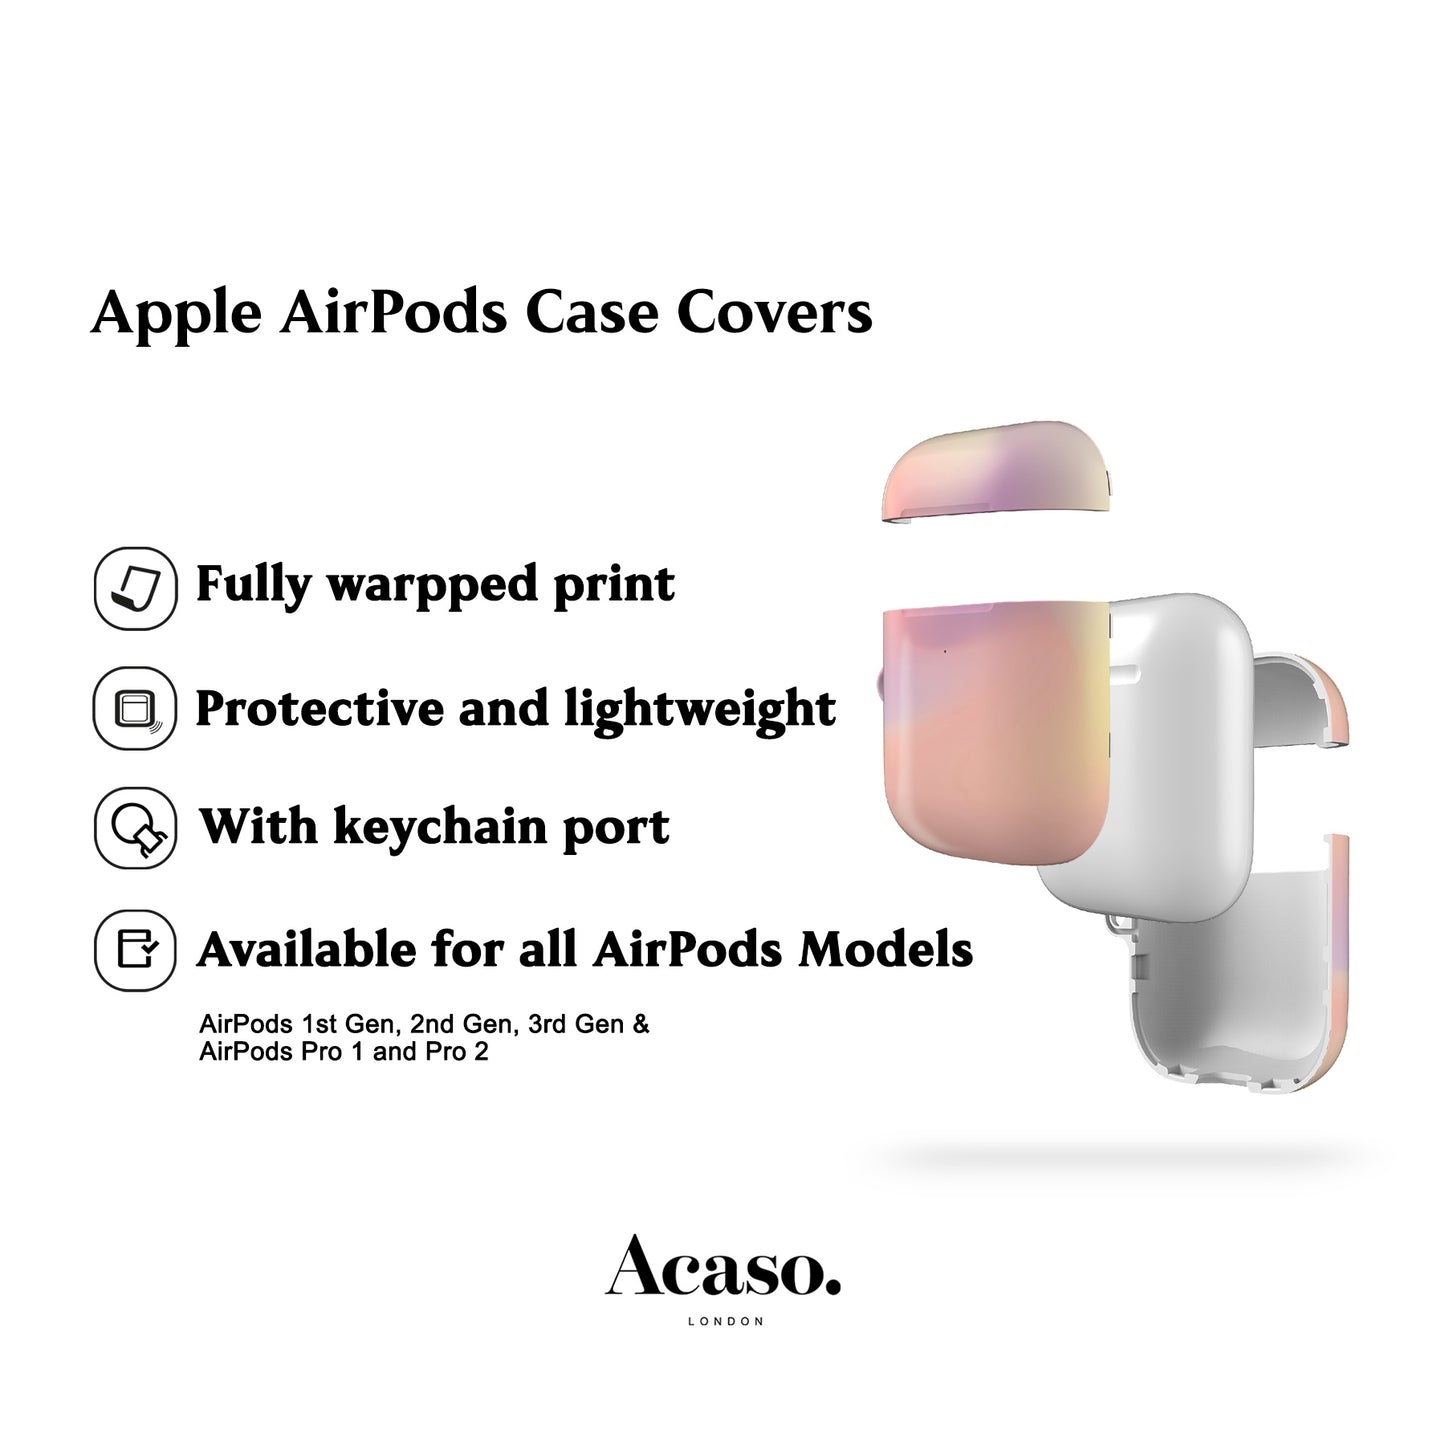 Soft Aura Pink AirPods Case Cover